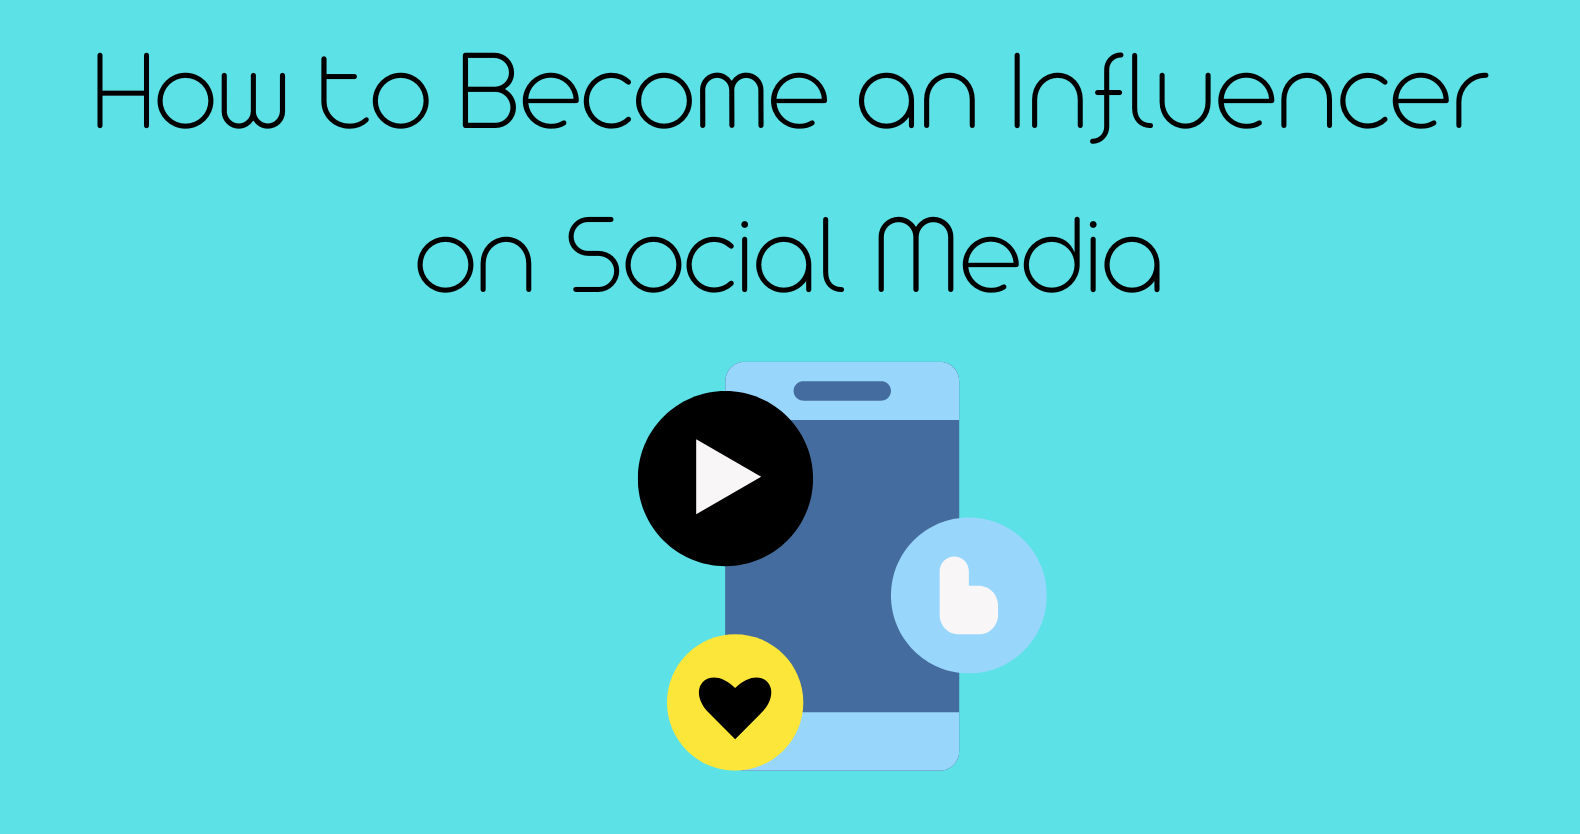 How to Become an Influencer on Social Media the Fastest